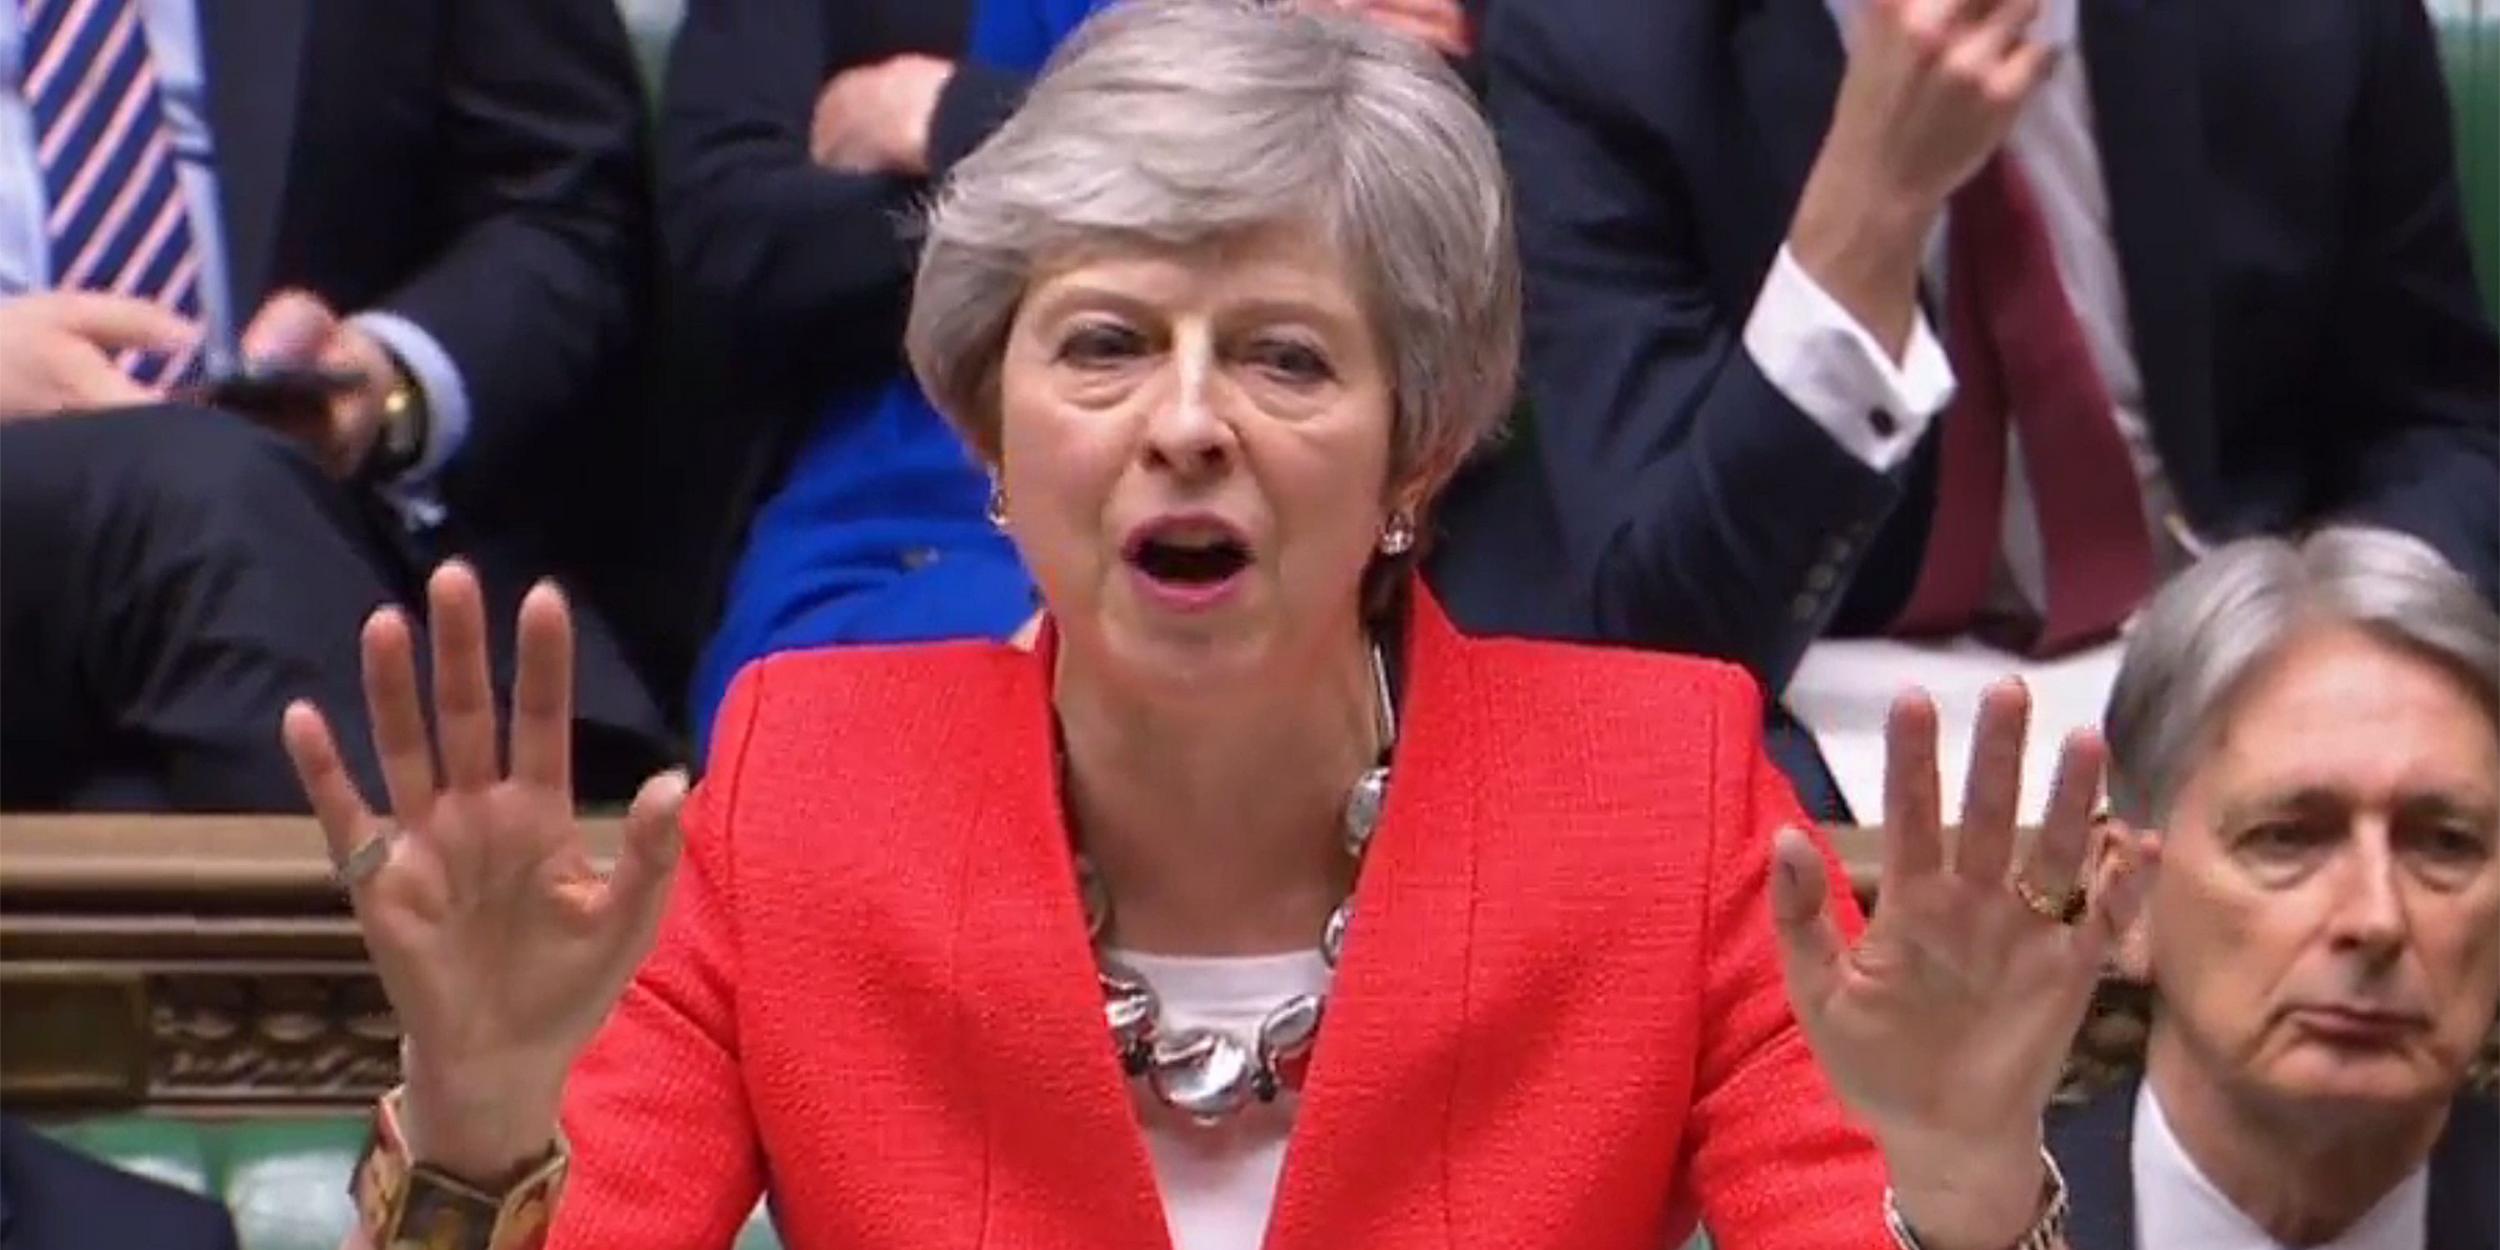 Brexit vote: 4 key moments that could spell the end for Theresa May as PM | indy1002500 x 1250